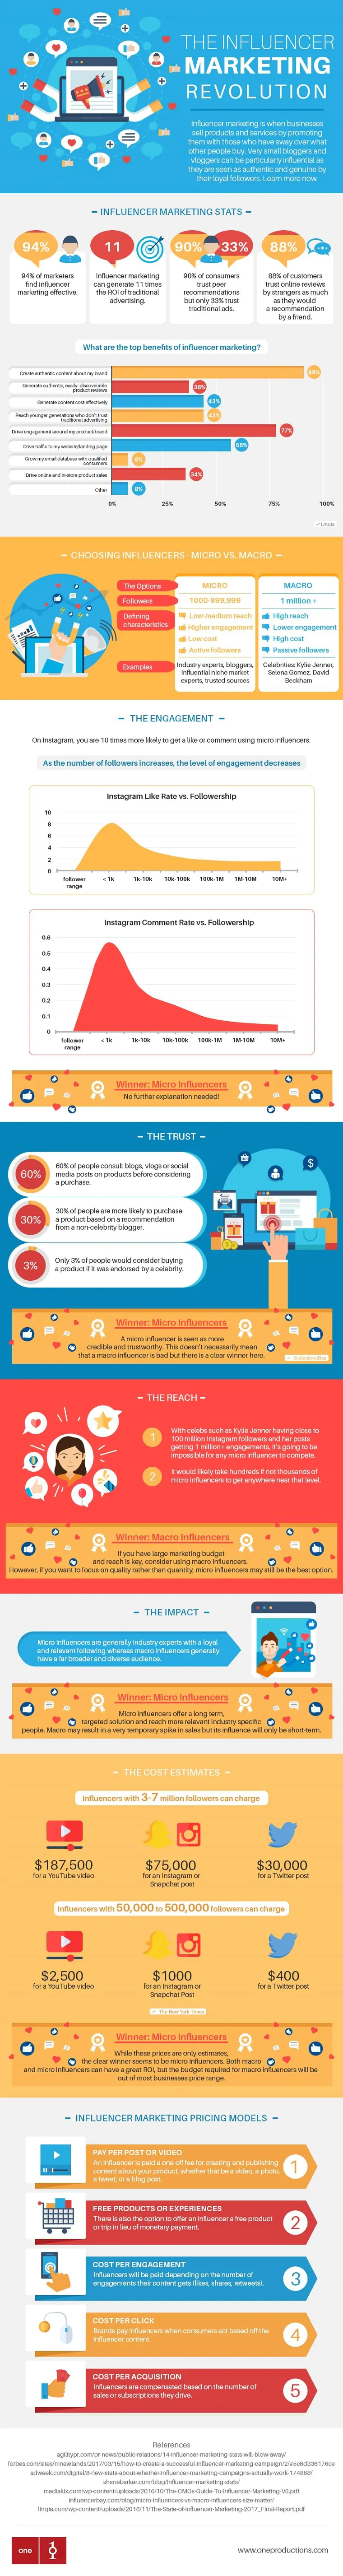 The influencer marketing infographic